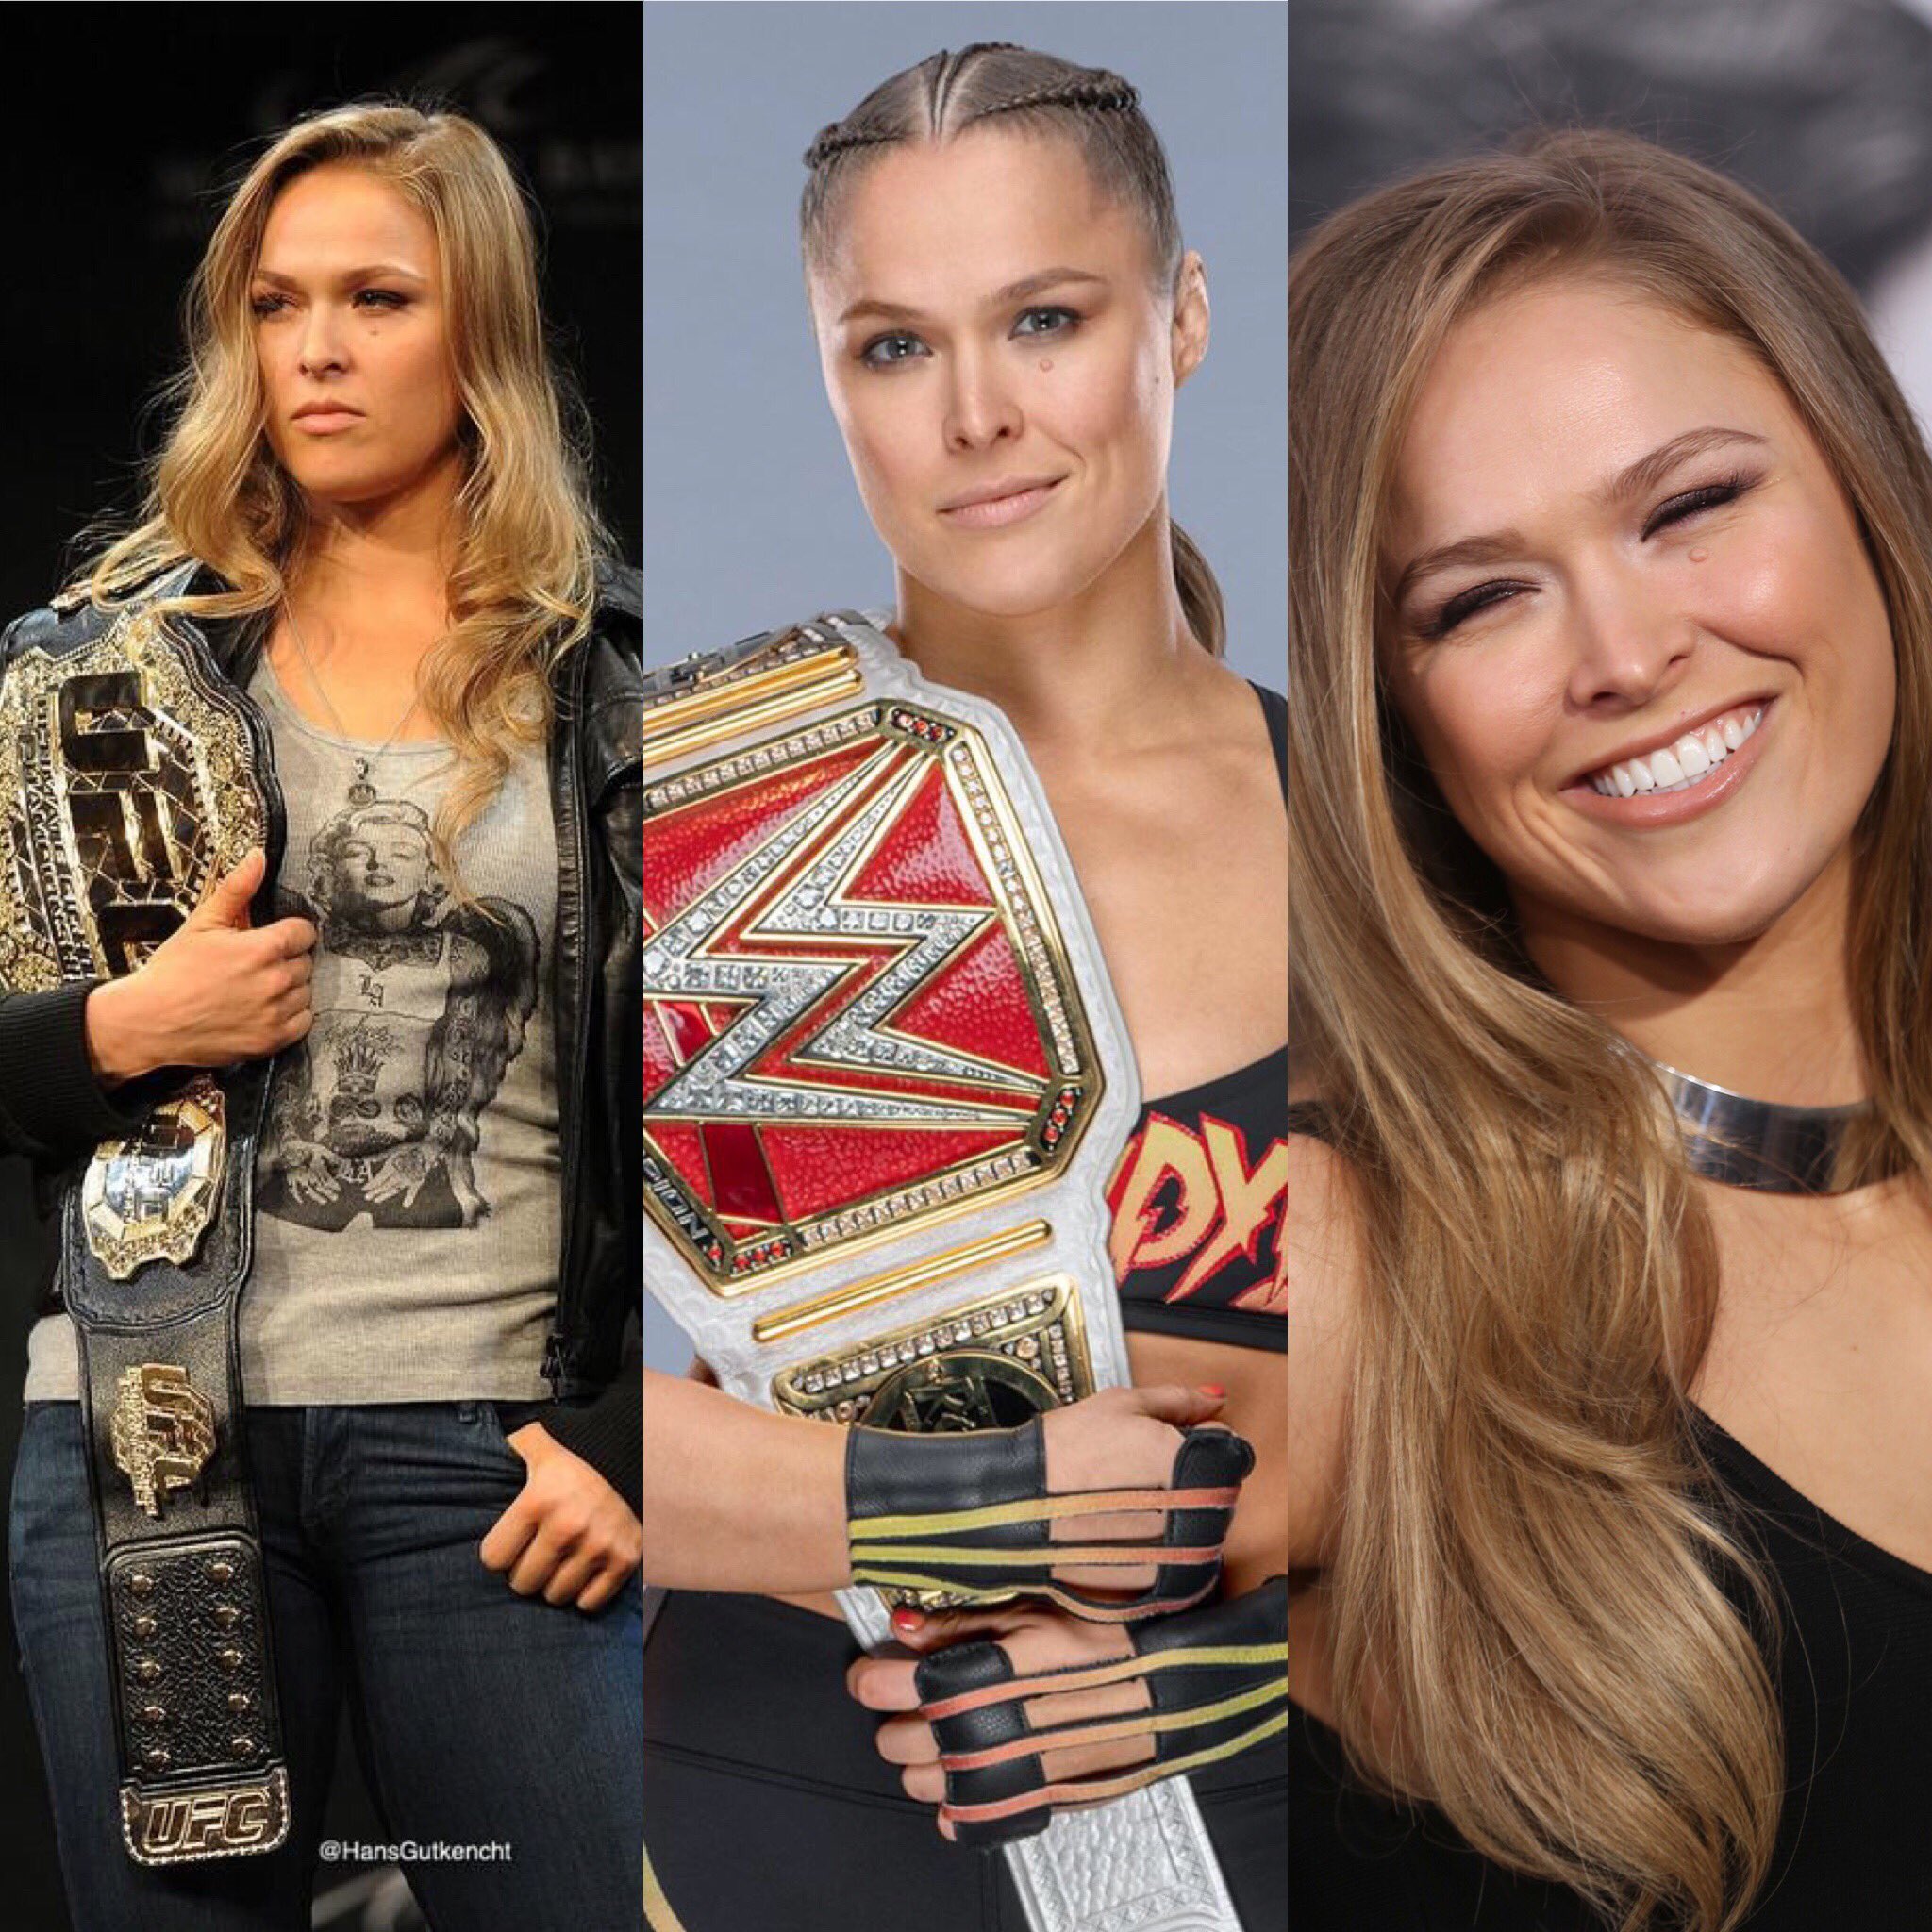 Happy Birthday to the Baddest Woman on the Planet Ronda Rousey! 